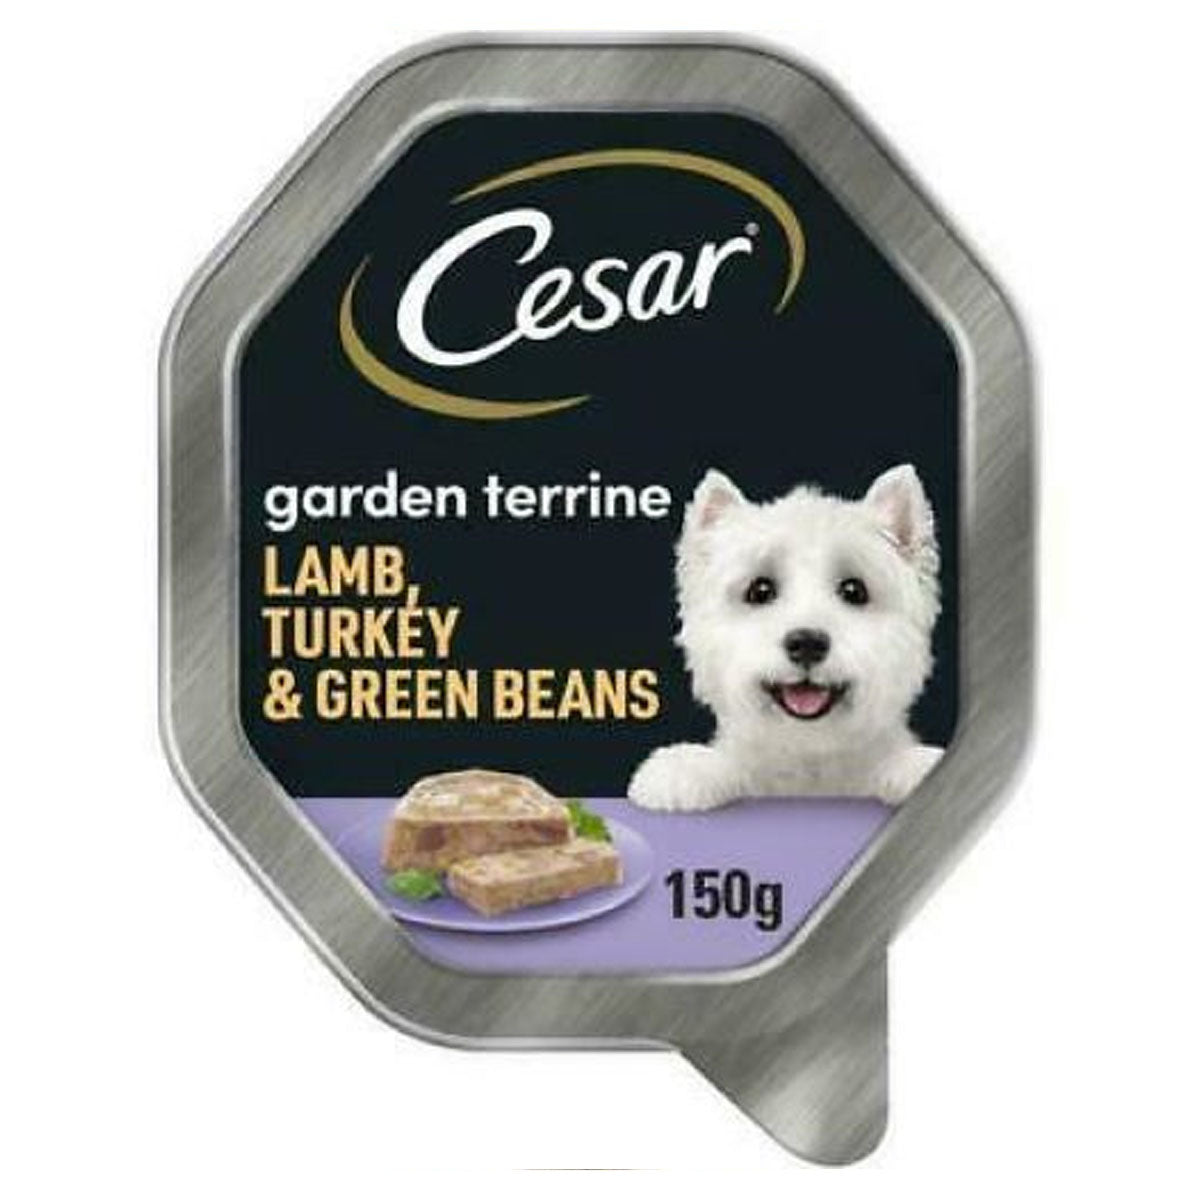 Cesar - Garden Terrine Dog Food Tray Lamb, Turkey & Green Beans in Loaf - 150g - Continental Food Store